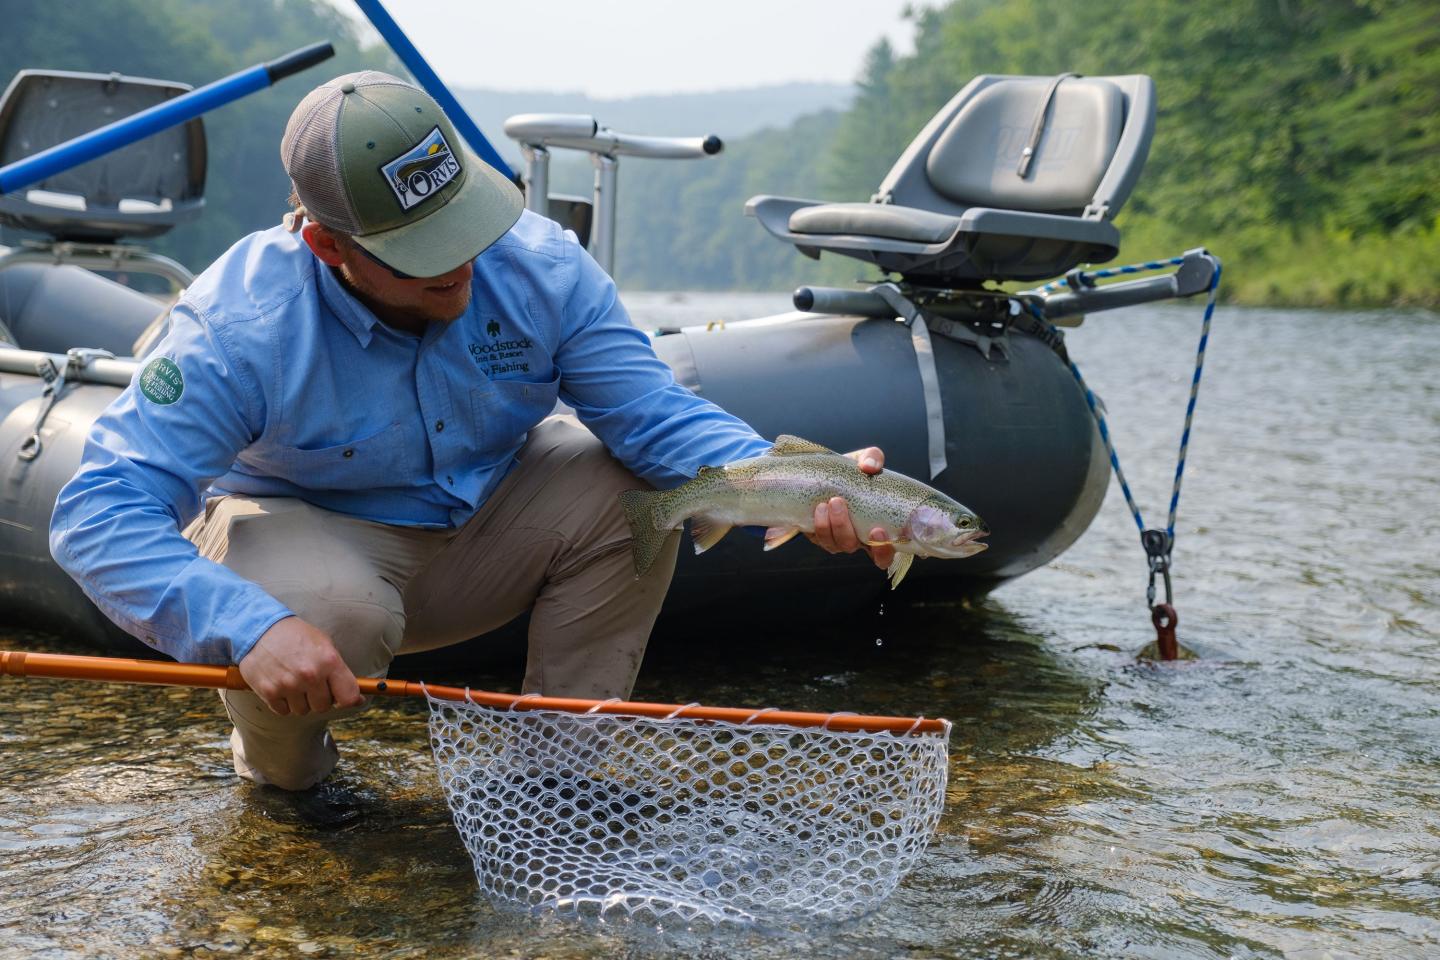 The Orvis Guide to Beginning Fly Fishing